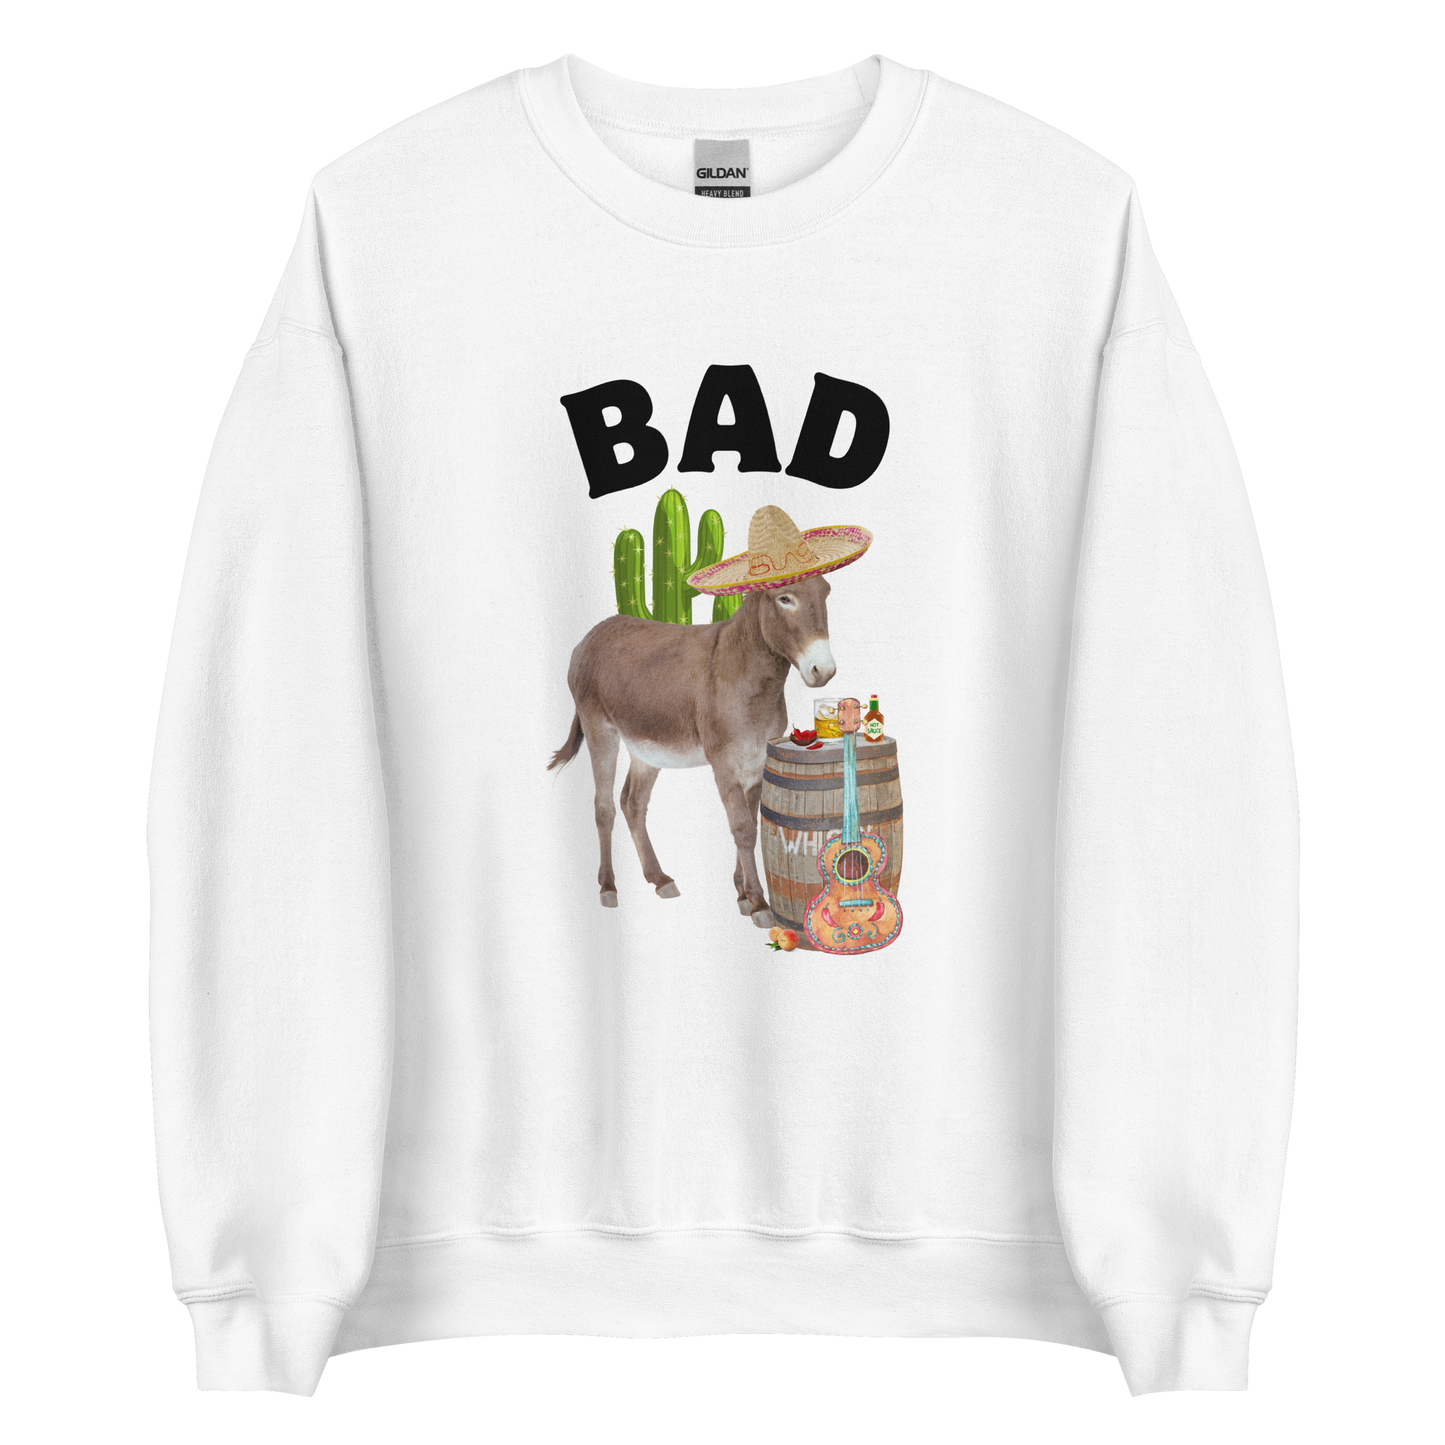 White Donkey Sweatshirt featuring a Funny Bad Ass Donkey graphic on the chest - Funny Graphic Bad Ass Donkey Sweatshirts - Boozy Fox